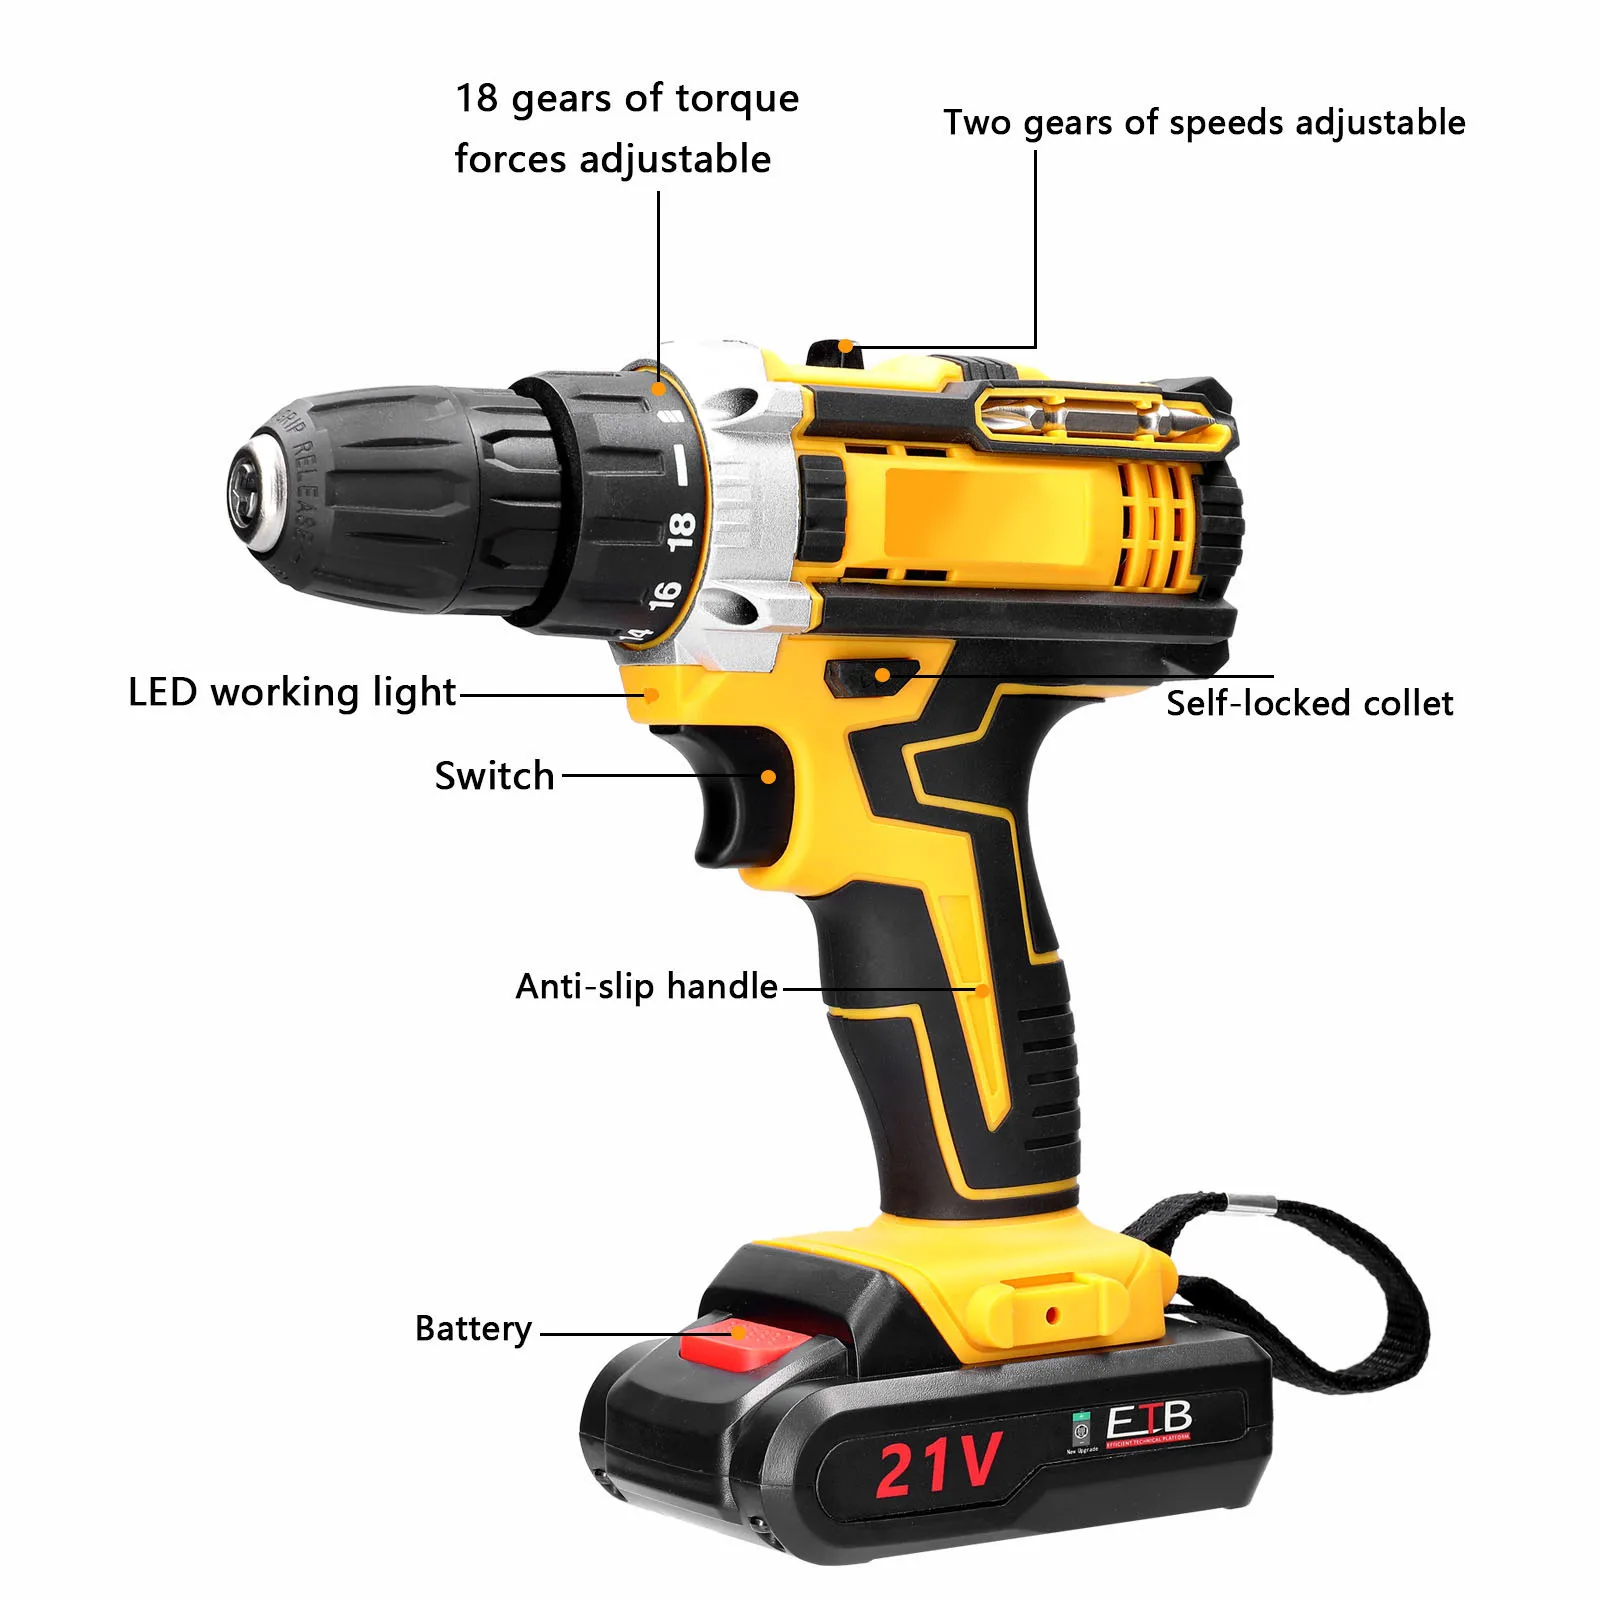 

21V Cordless Screwdriver Drill Power Tools Wireless Drills Rechargeable Drill Set for Electric Screwdriver Battery Driller Tool